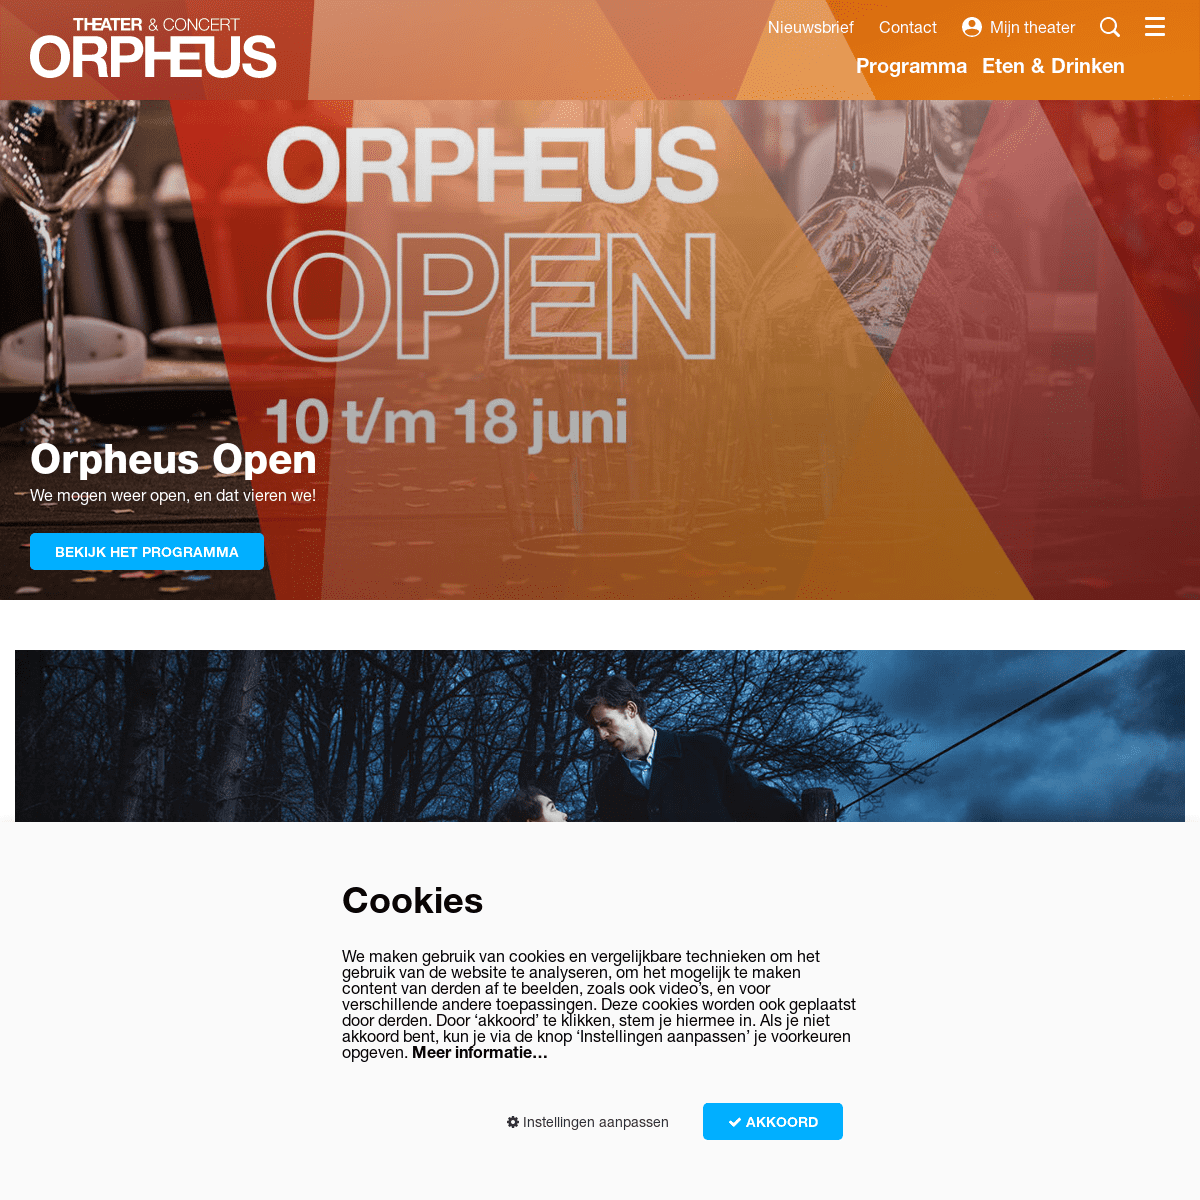 A complete backup of https://orpheus.nl